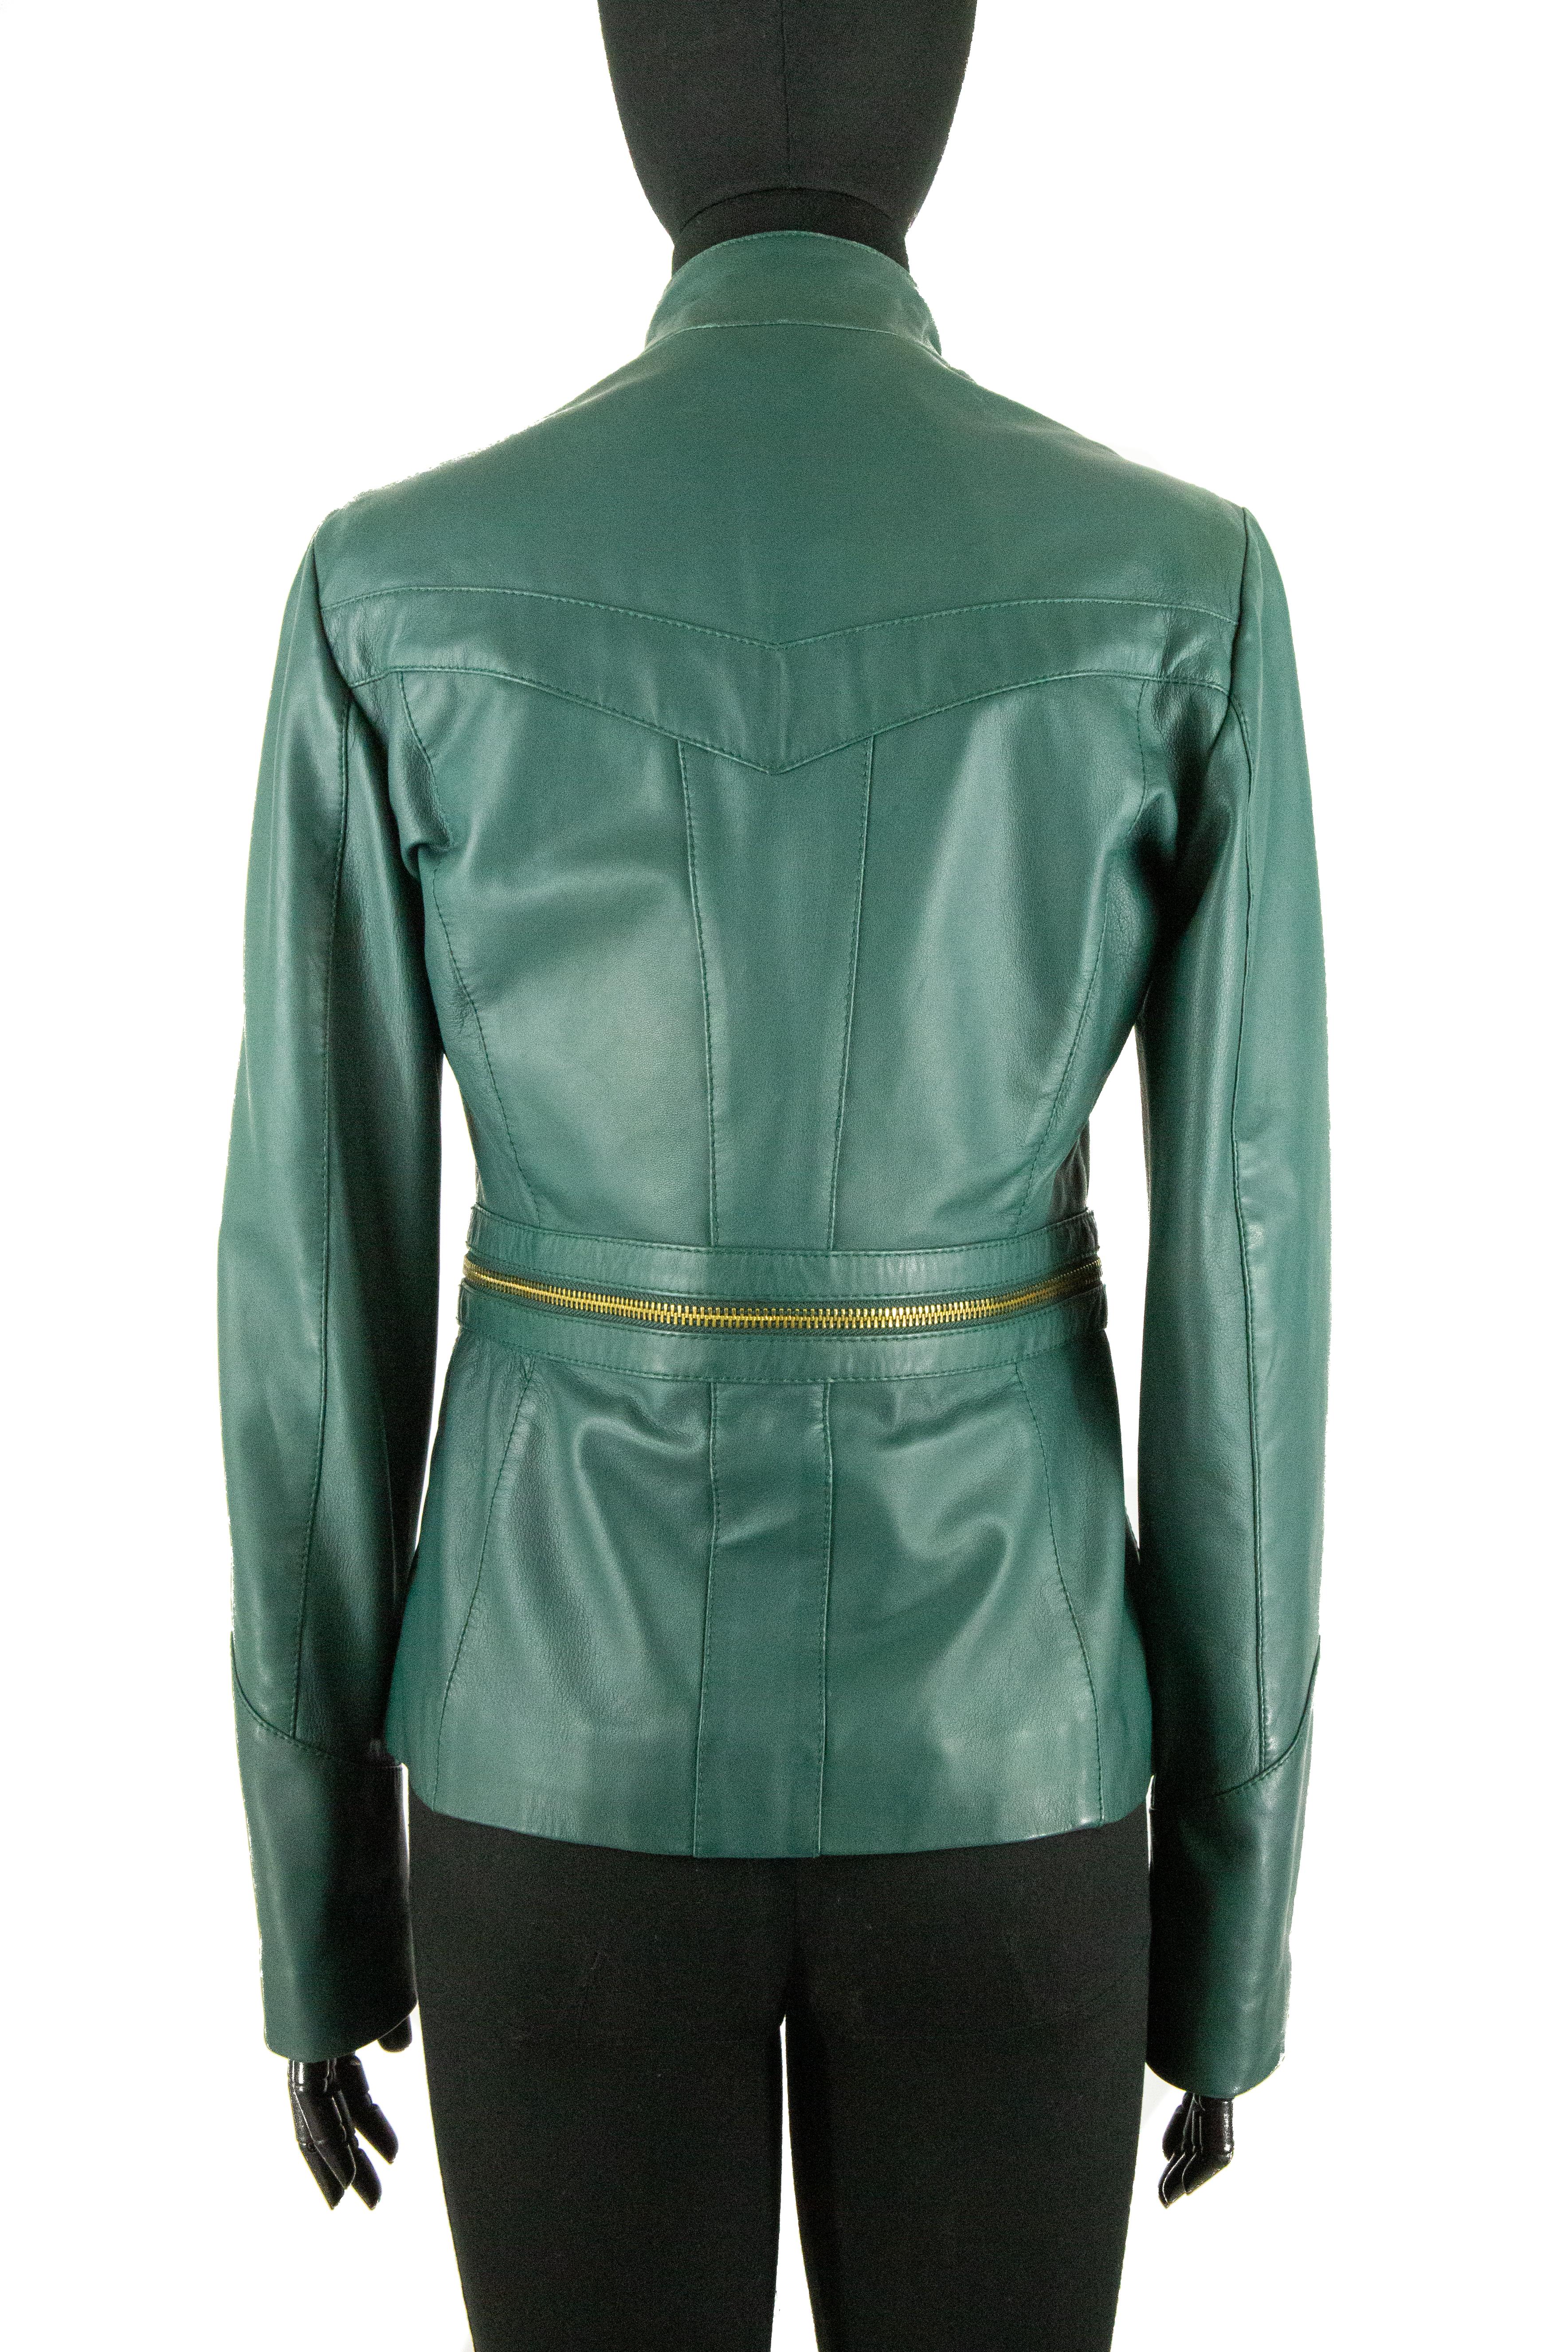 forest green leather jacket